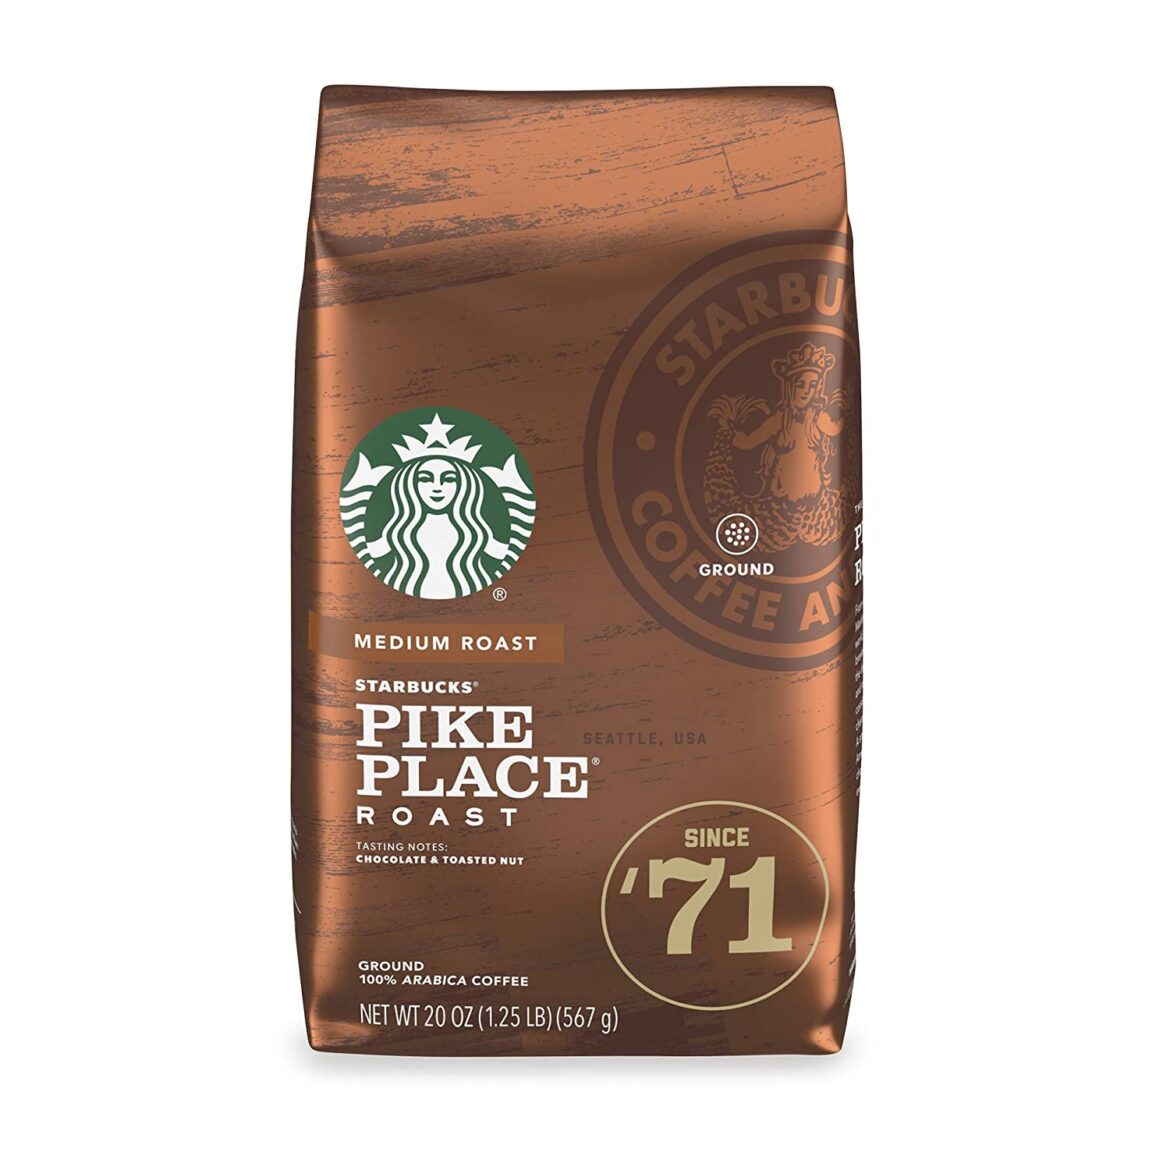 Best Starbucks coffee and More